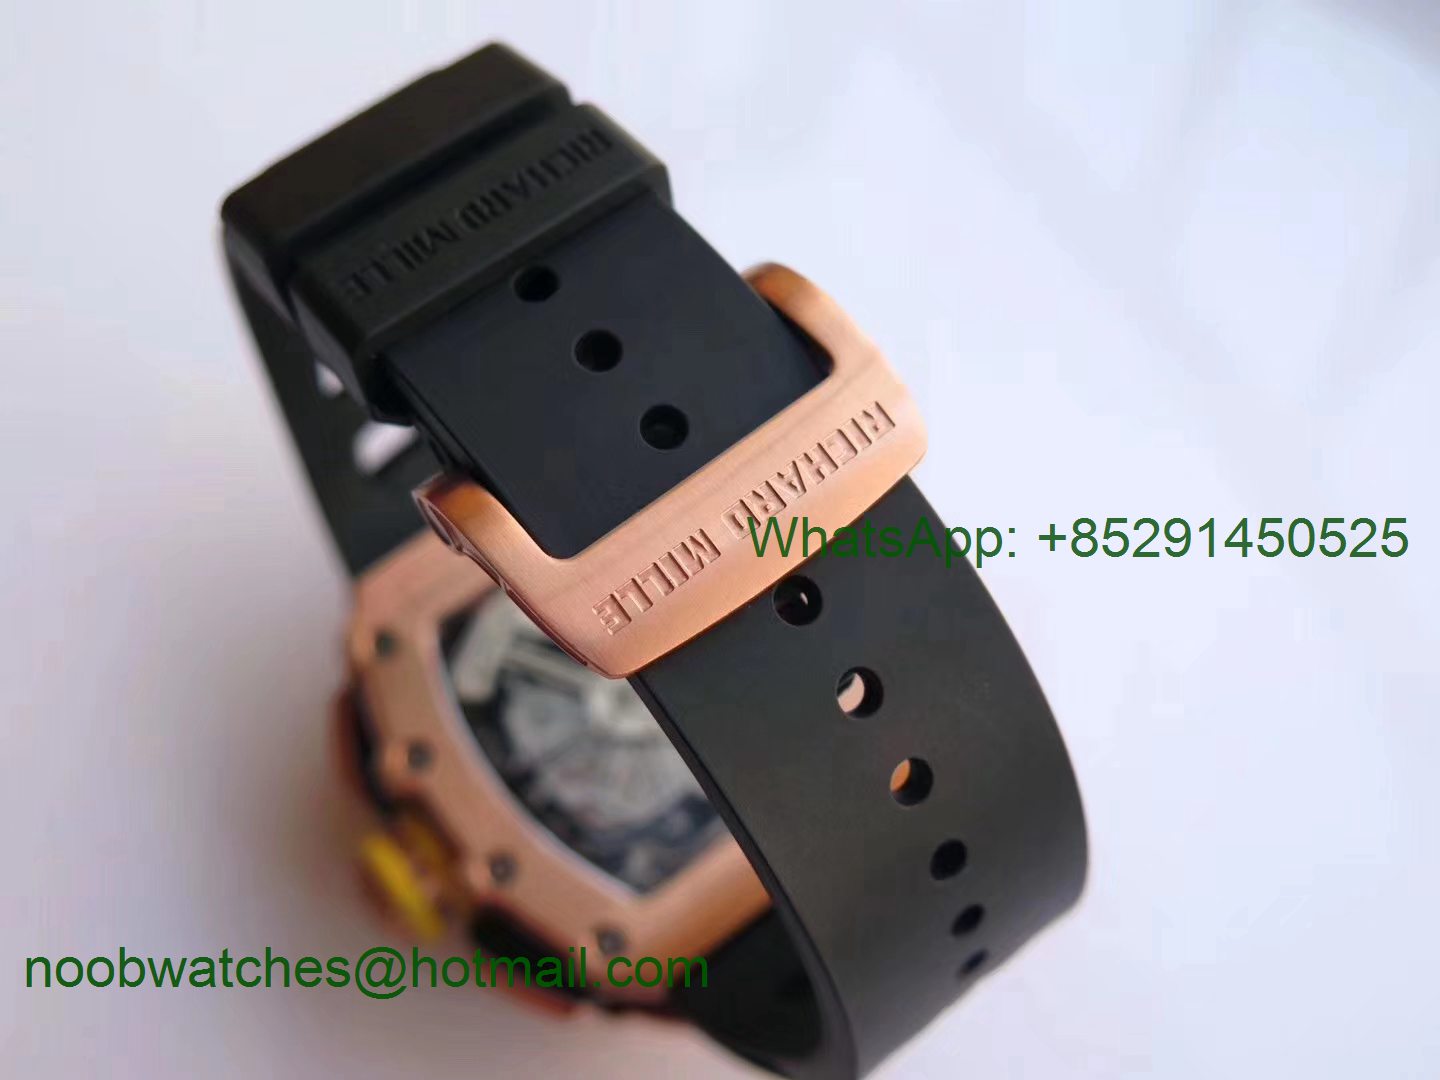 Replica Richard Mille RM011 Rose Gold Chronograph KVF 1:1 Best Edition Crystal Skeleton Dial on Black Rubber Strap A7750